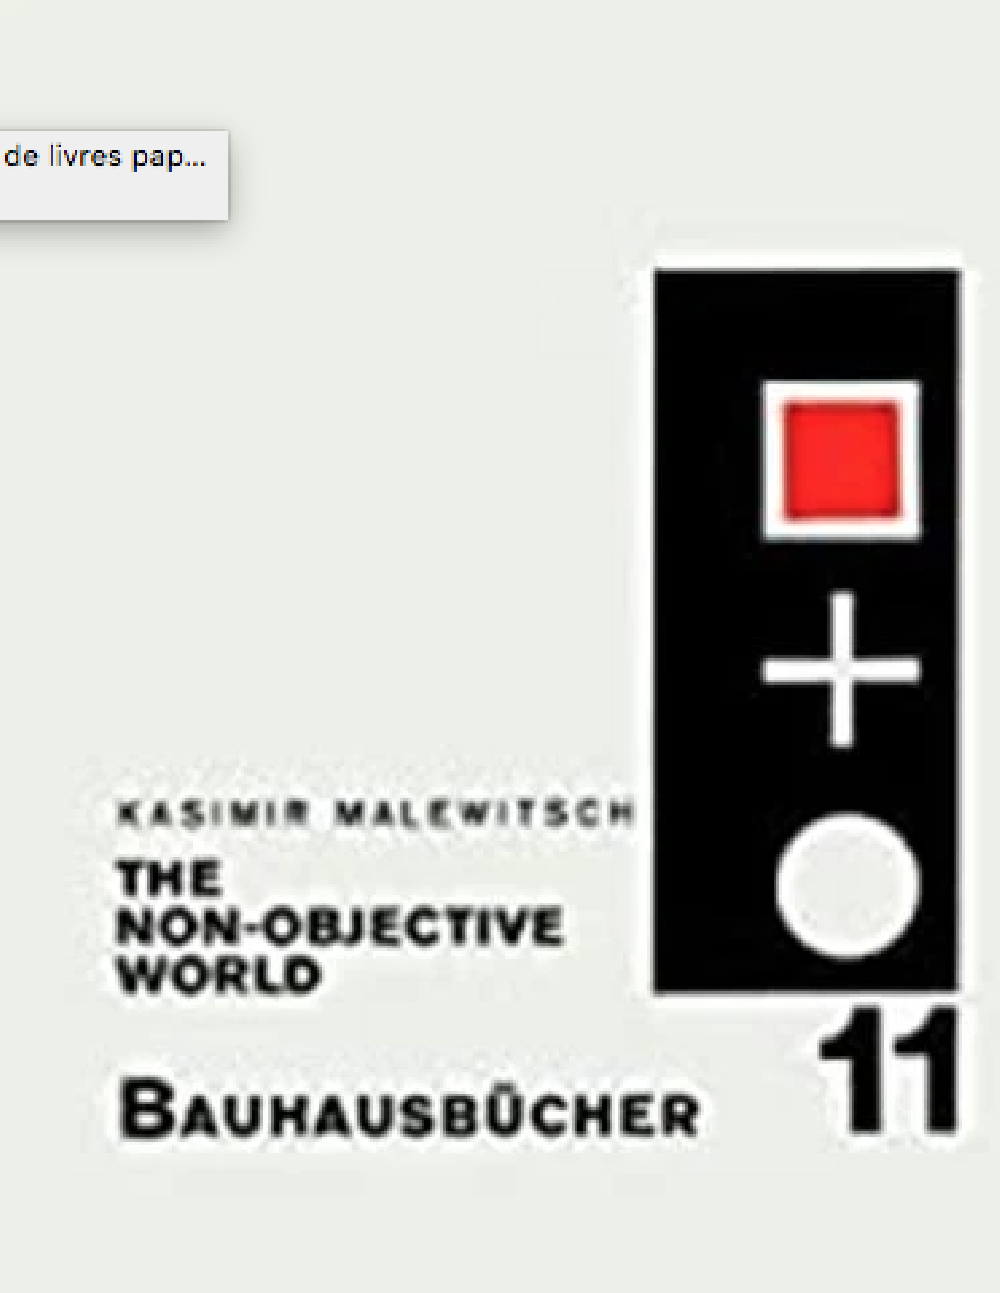 Kasimir Malevich The Non-objective World